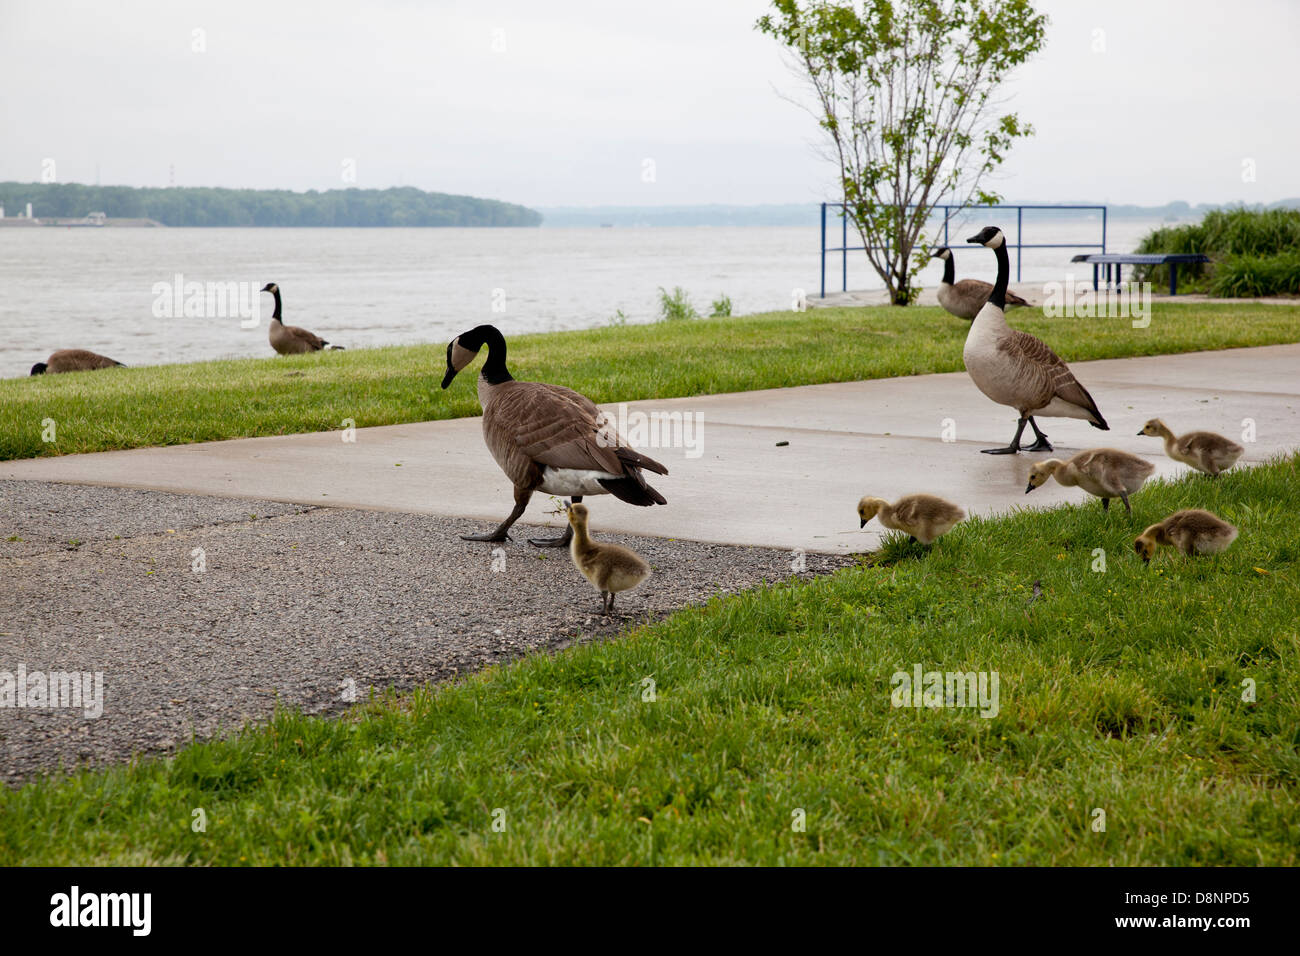 Baby geese with their mother at a park by a river Stock Photo